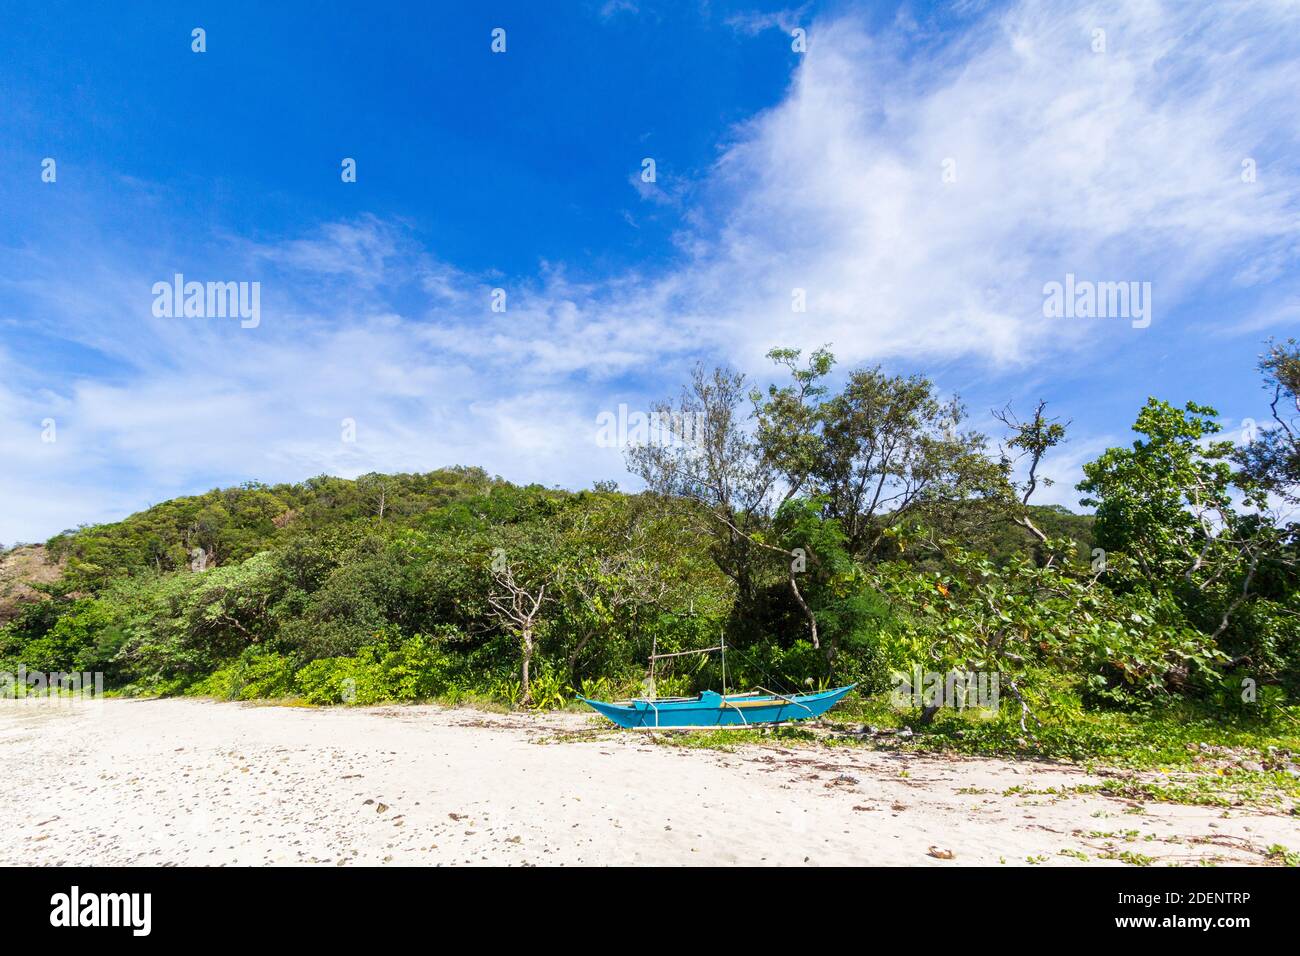 Outrigger boat at a beach in Baler, Philippines Stock Photo